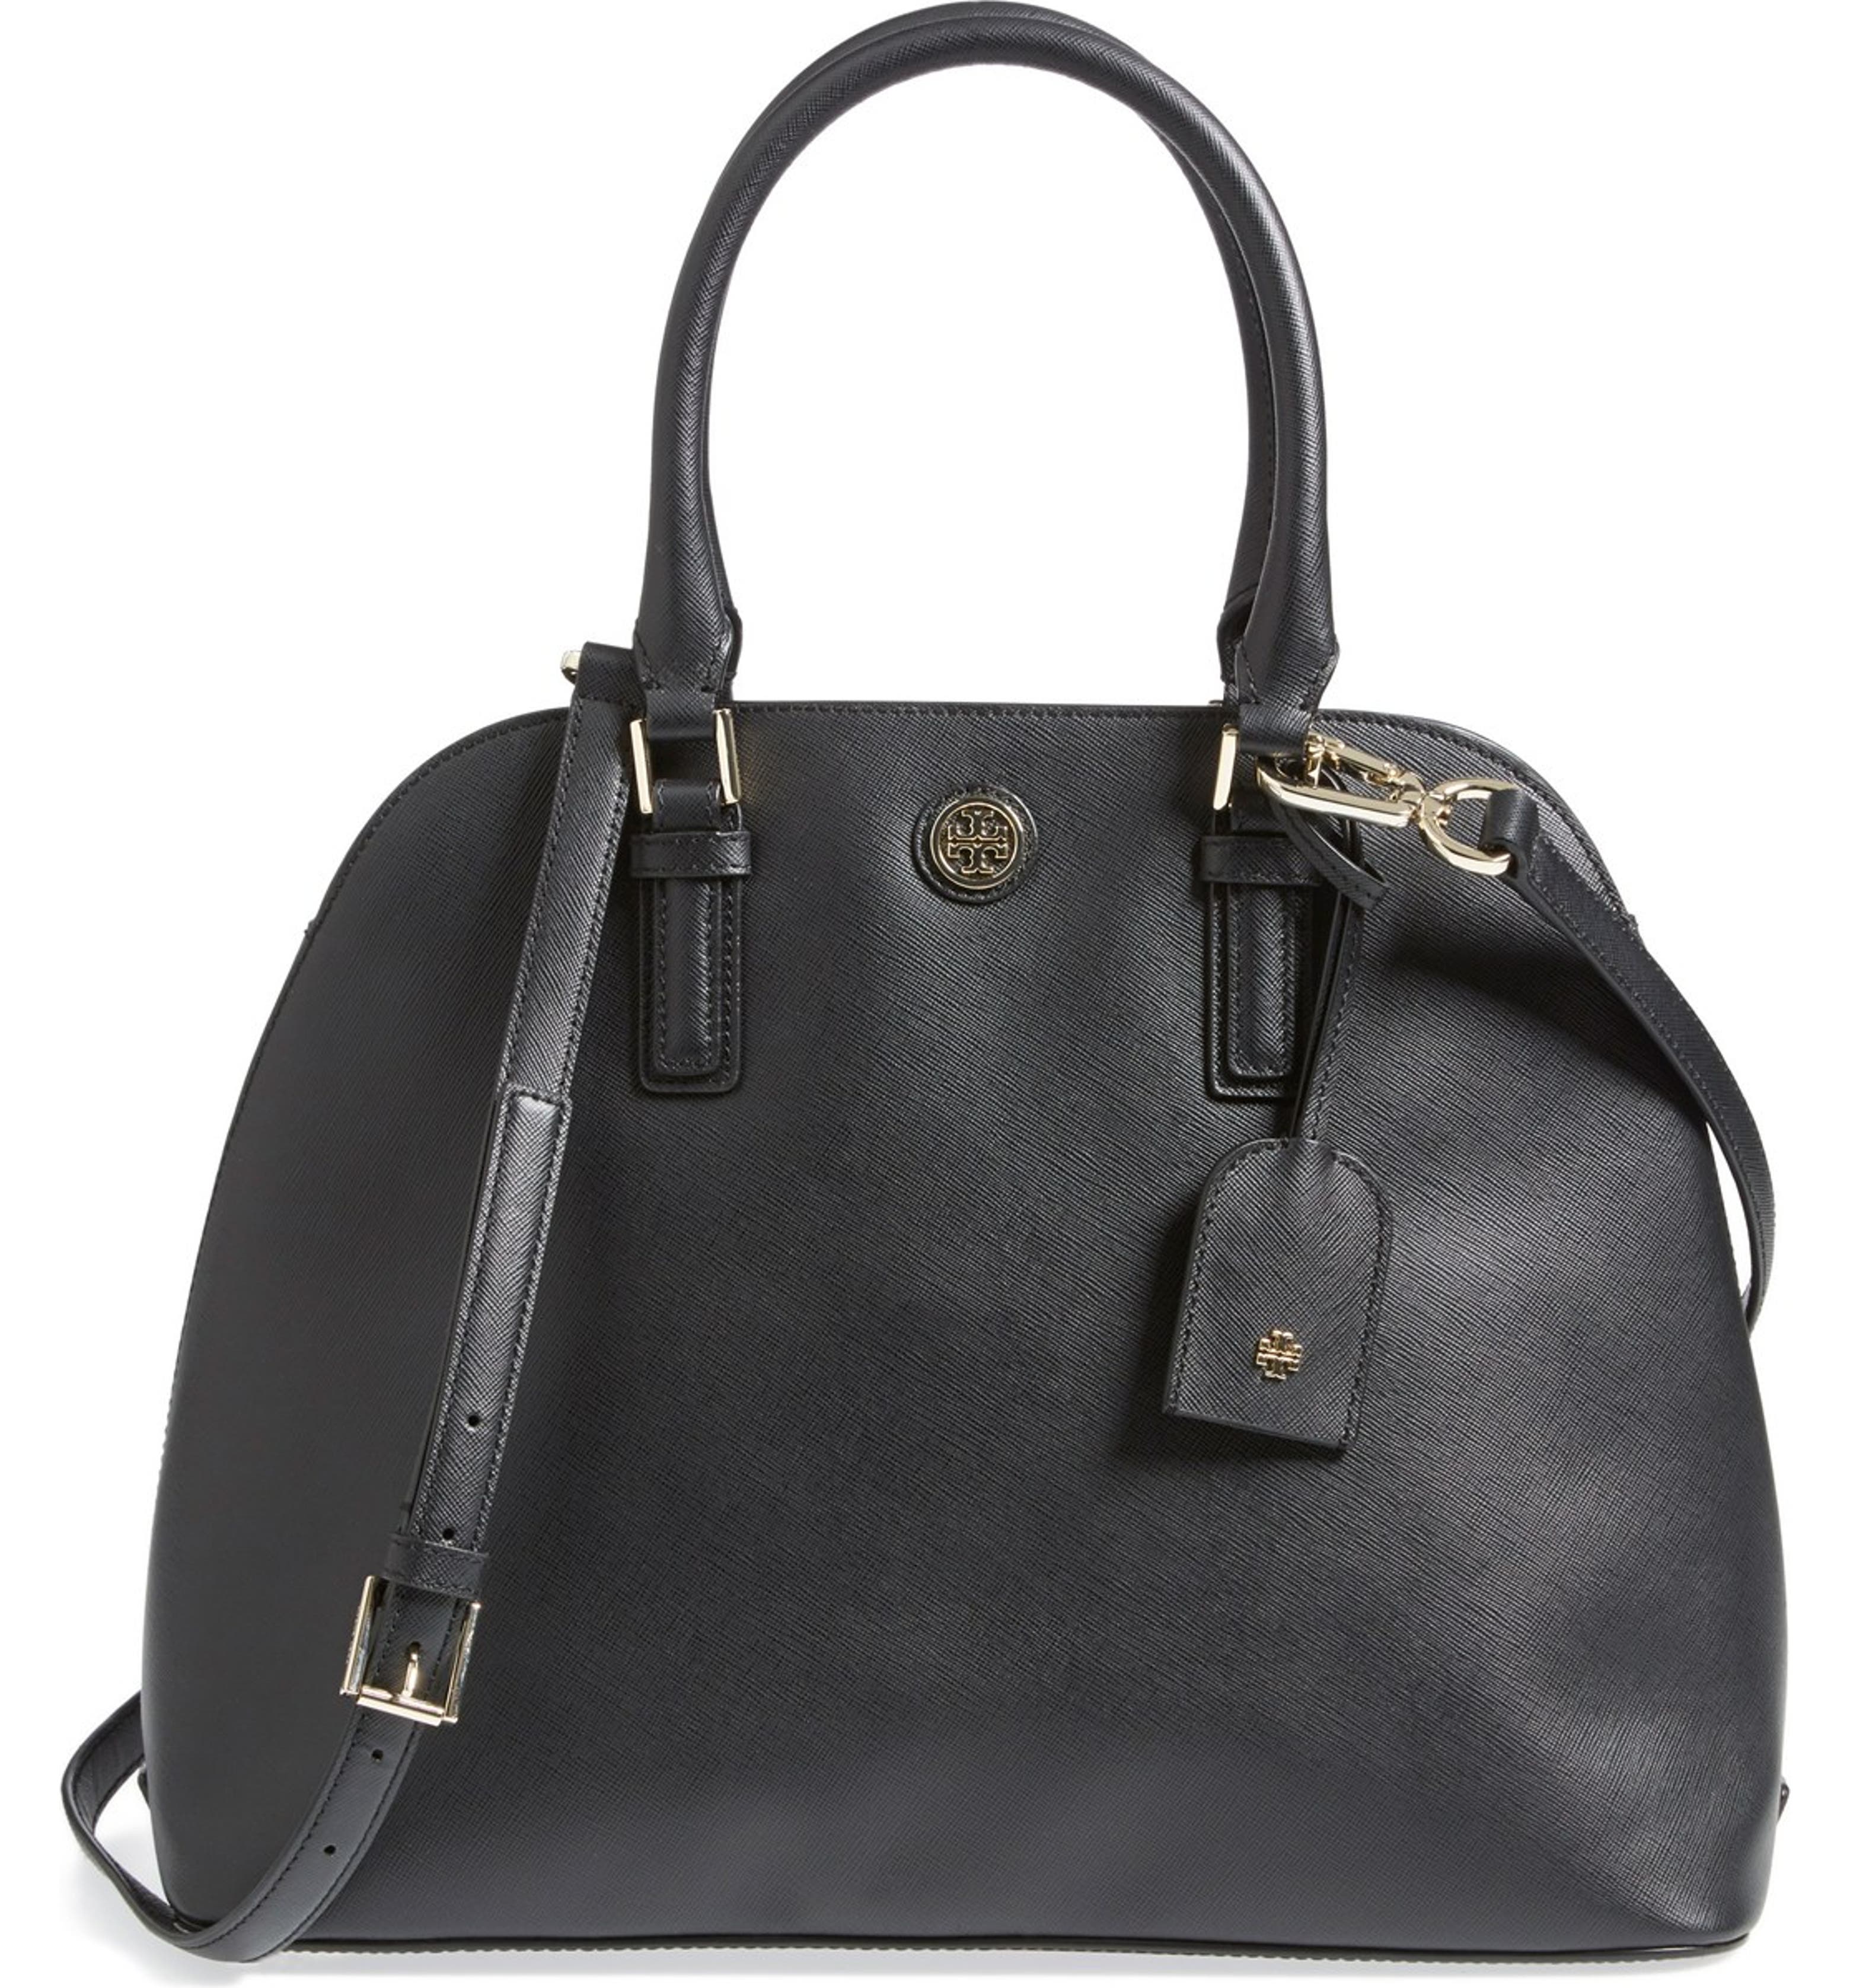 Tory Burch 'Robinson' Leather Dome Satchel | Nordstrom